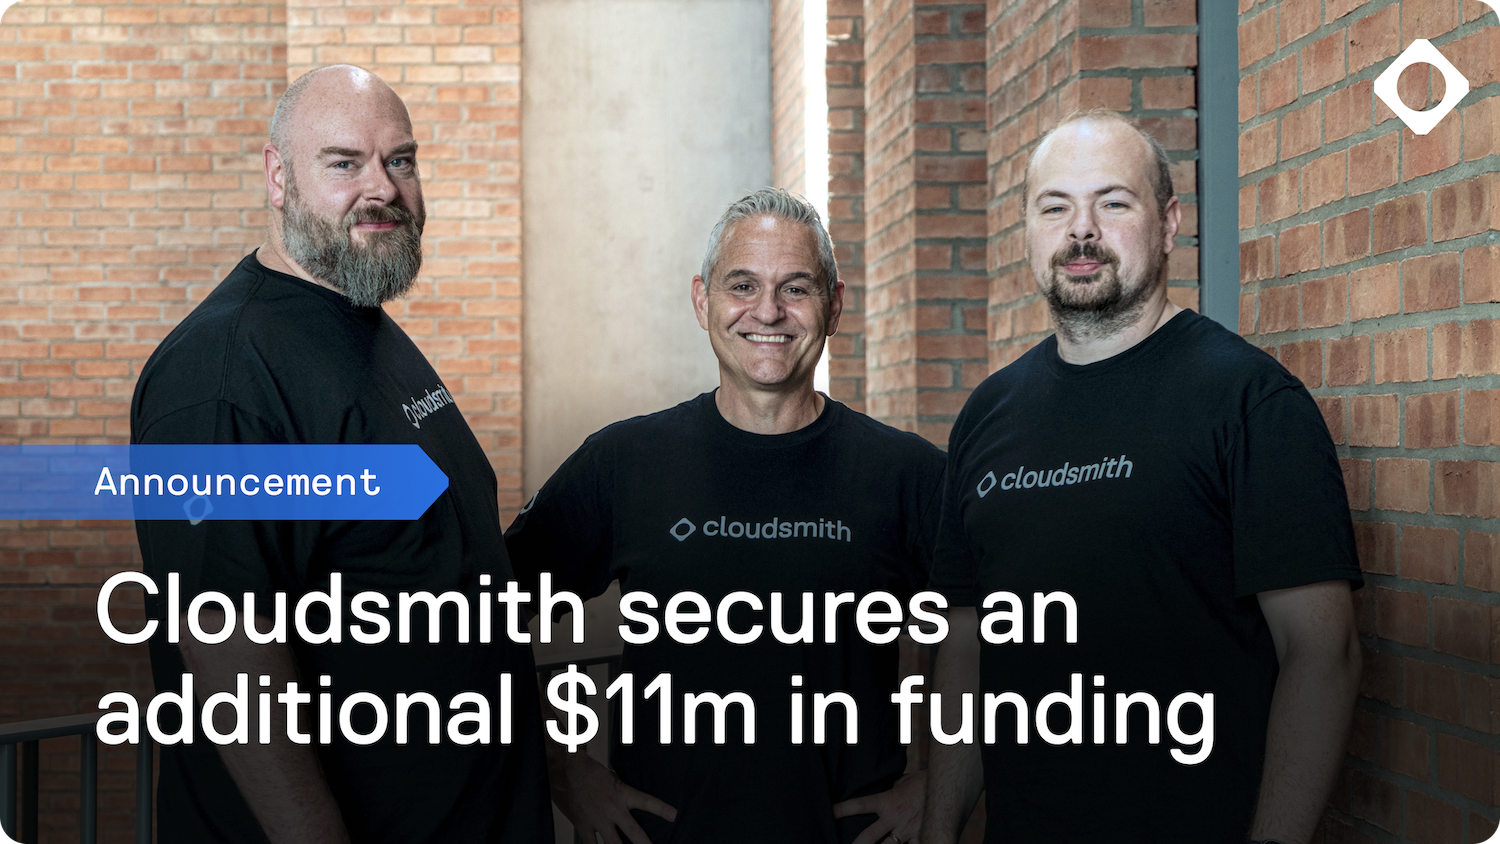 Cloudsmith's new CEO Glenn Weinstein announces $11m in Series A2 funding